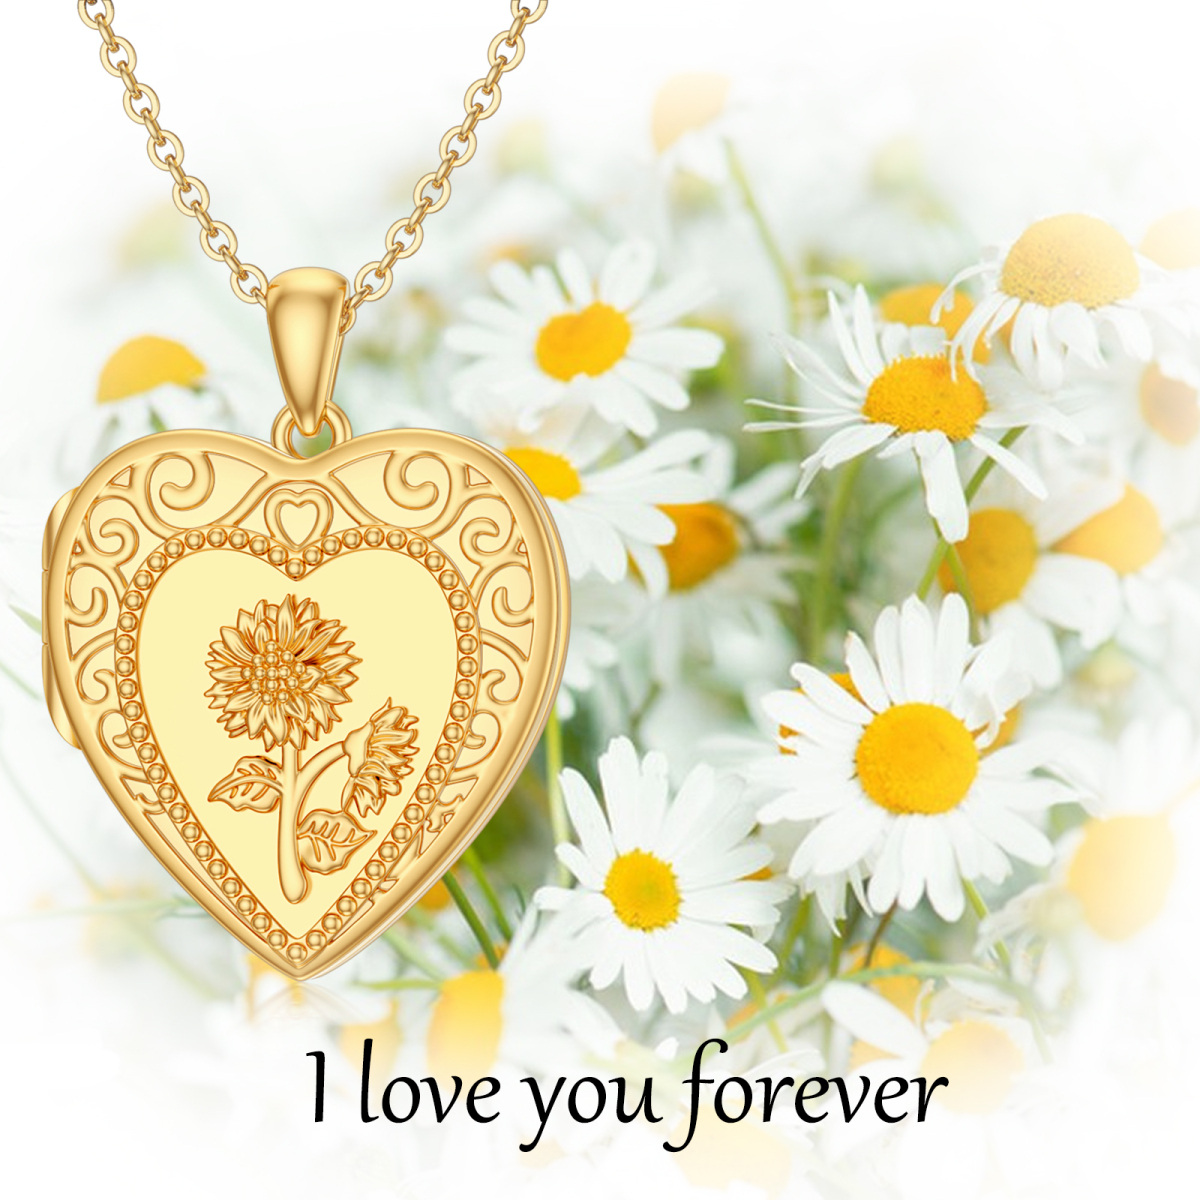 10K Gold Personalized Photo & Heart Personalized Photo Locket Necklace-7